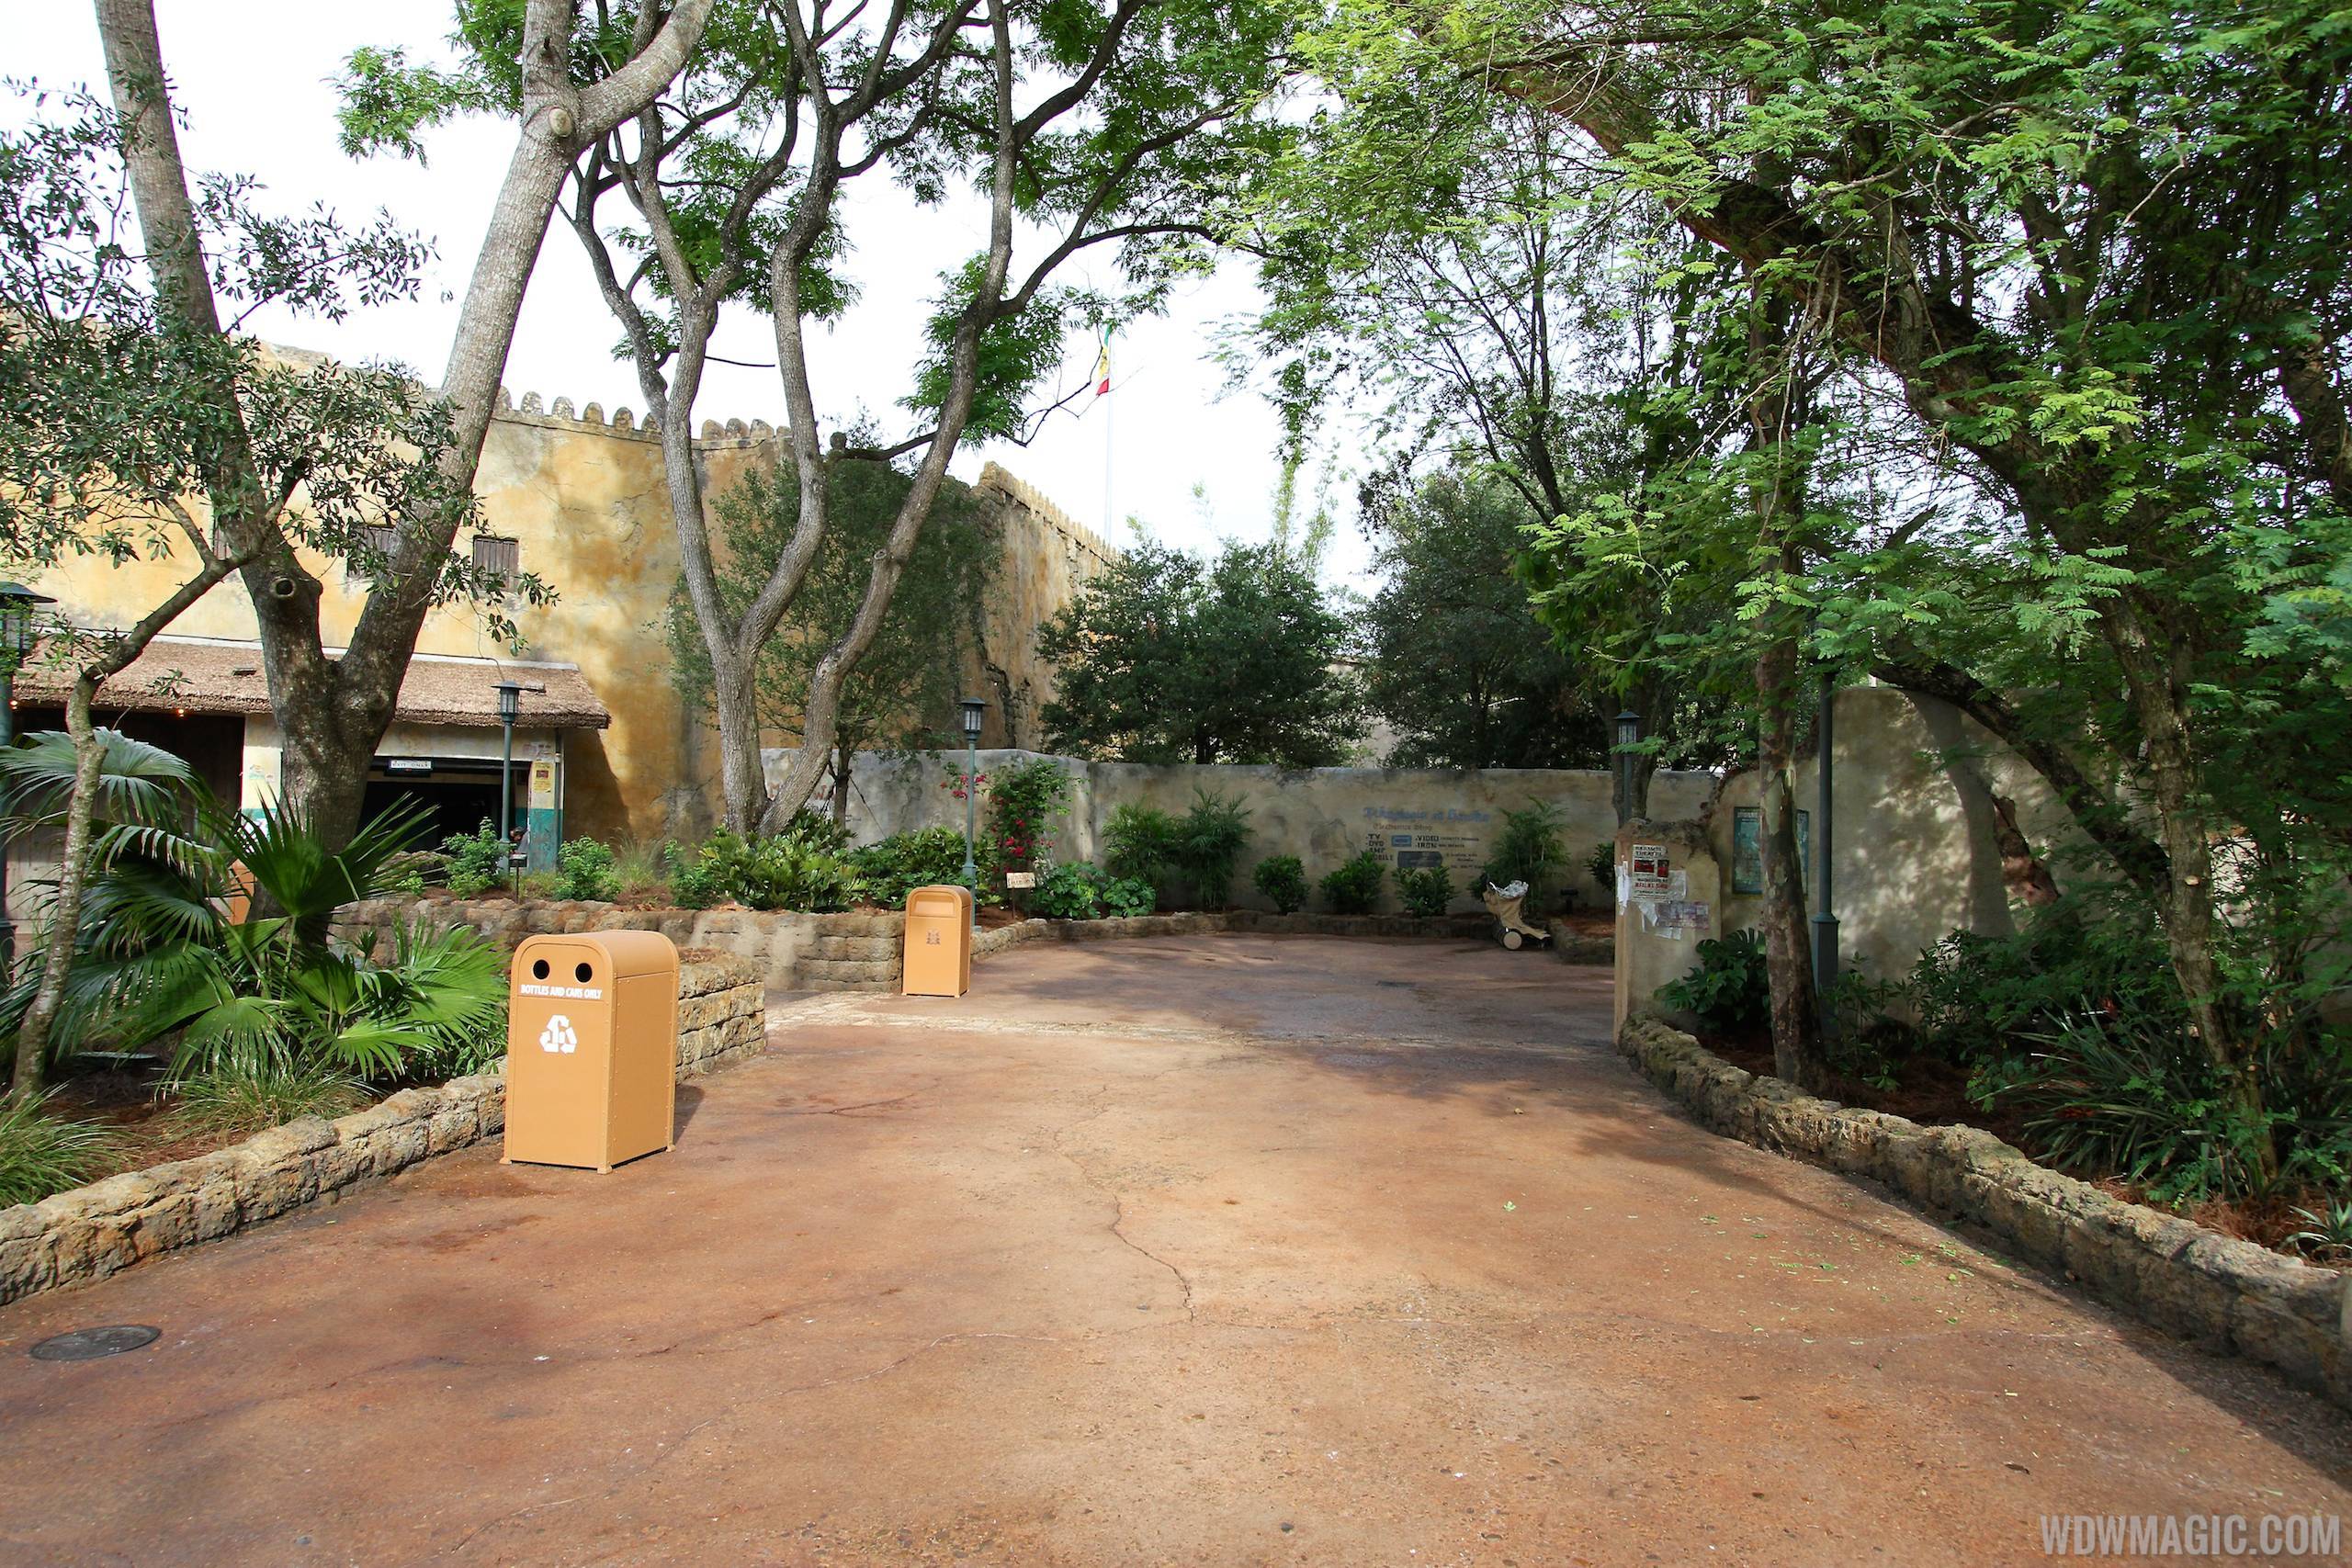 New Harambe Theatre area in Africa - Stroller Parking area